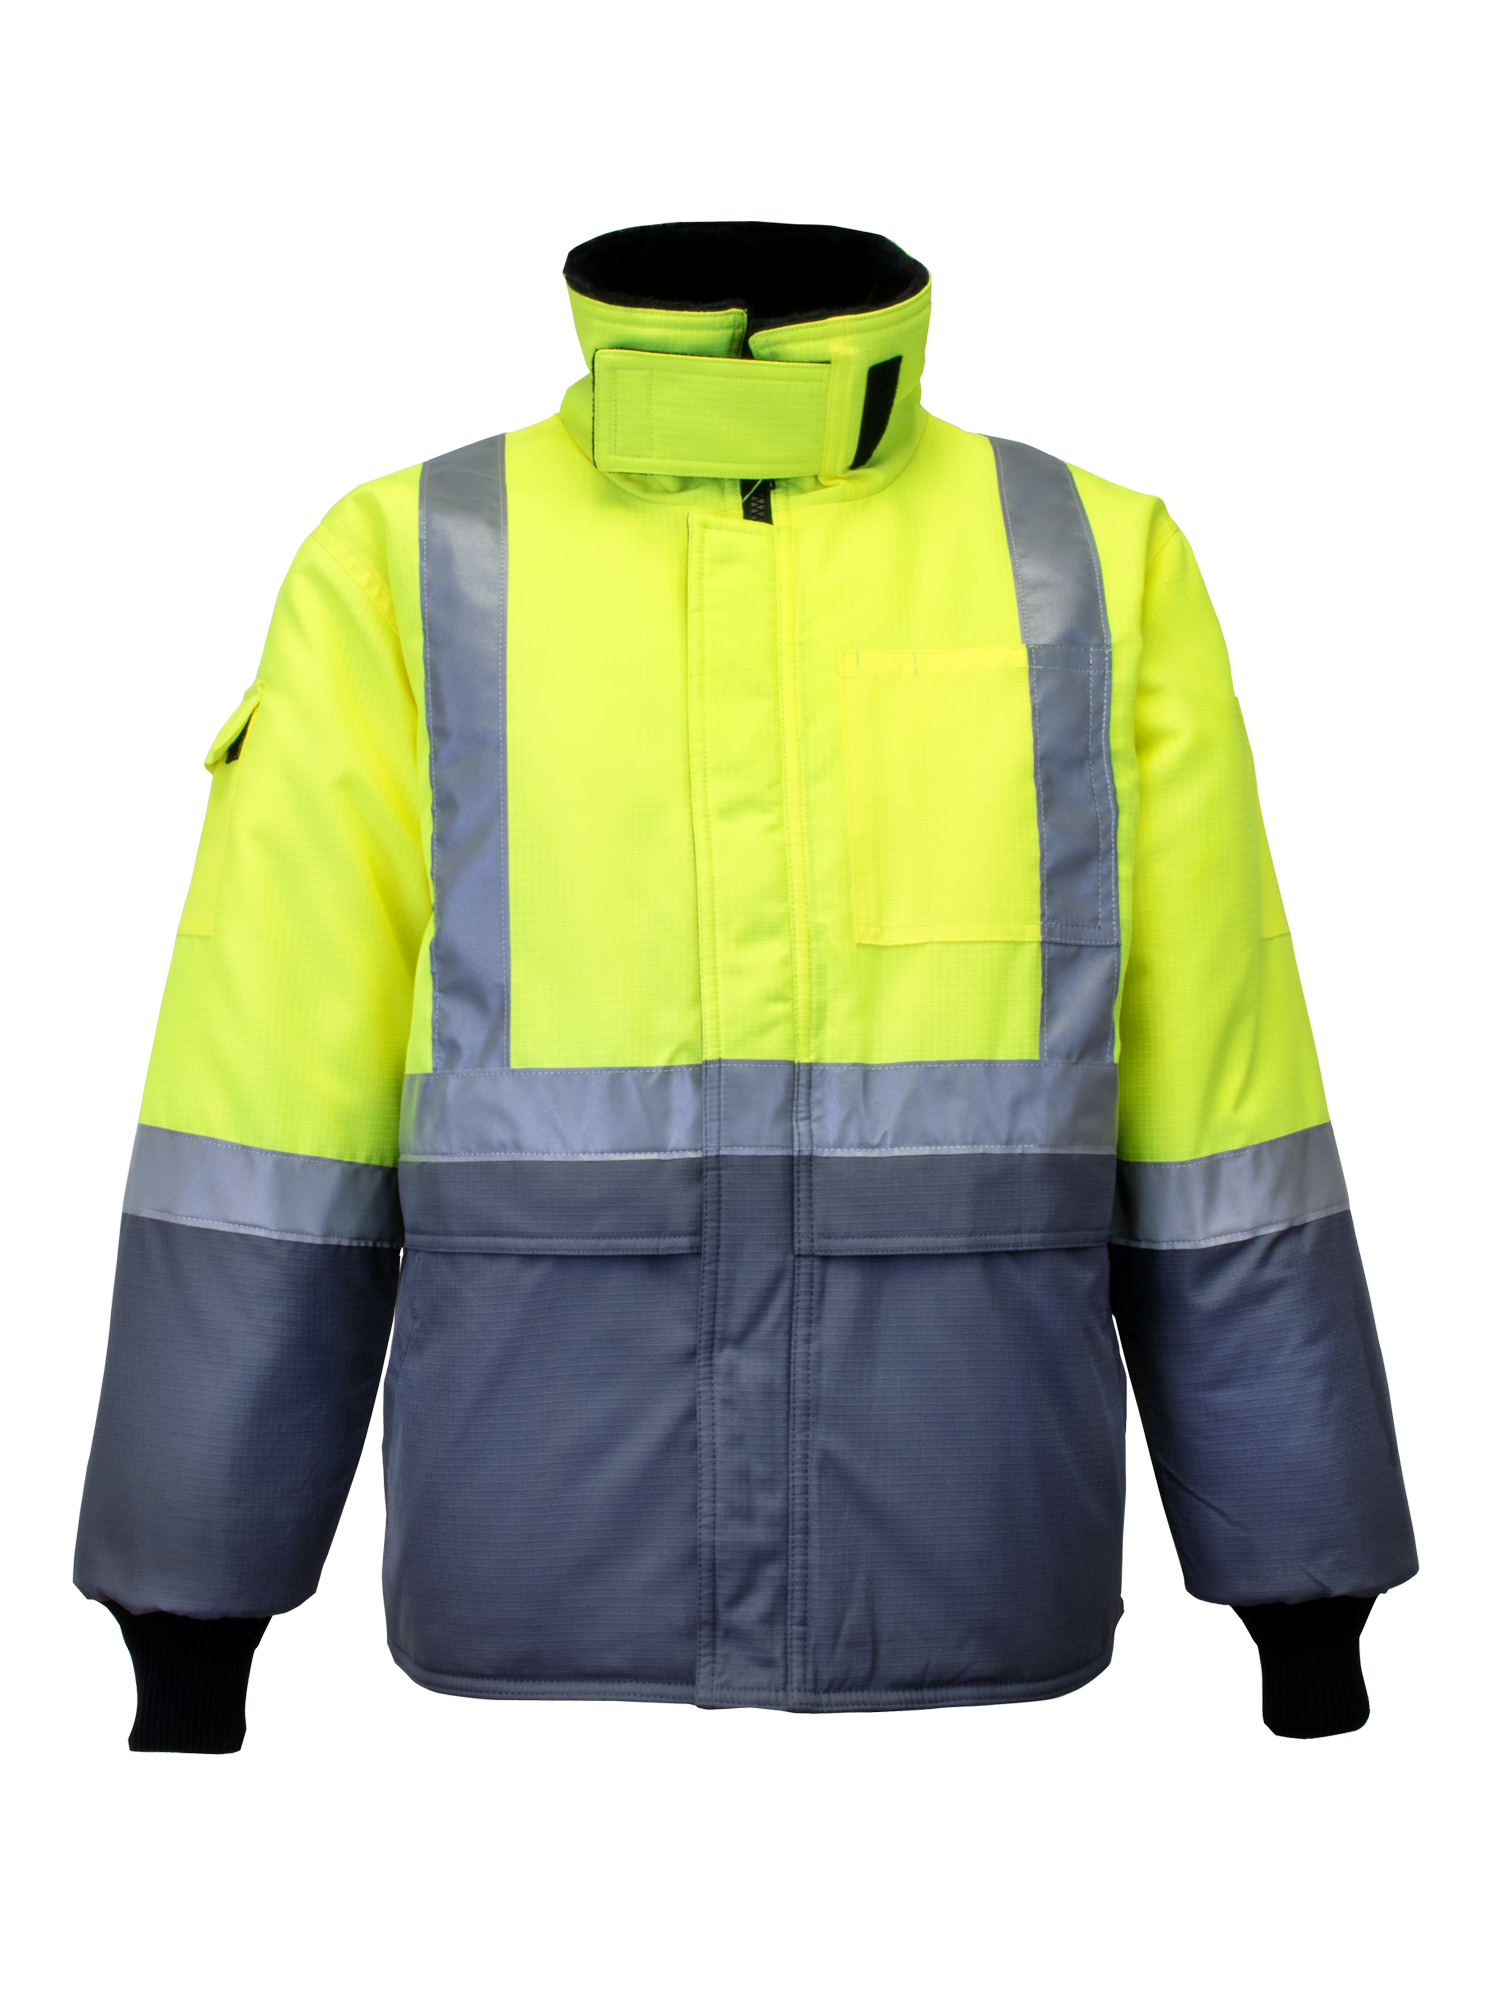 RefrigiWear High Visibility Hi Vis ANSI Class E, Insulated Softshell High  Bib Work Overalls (Lime, 4X-Large)